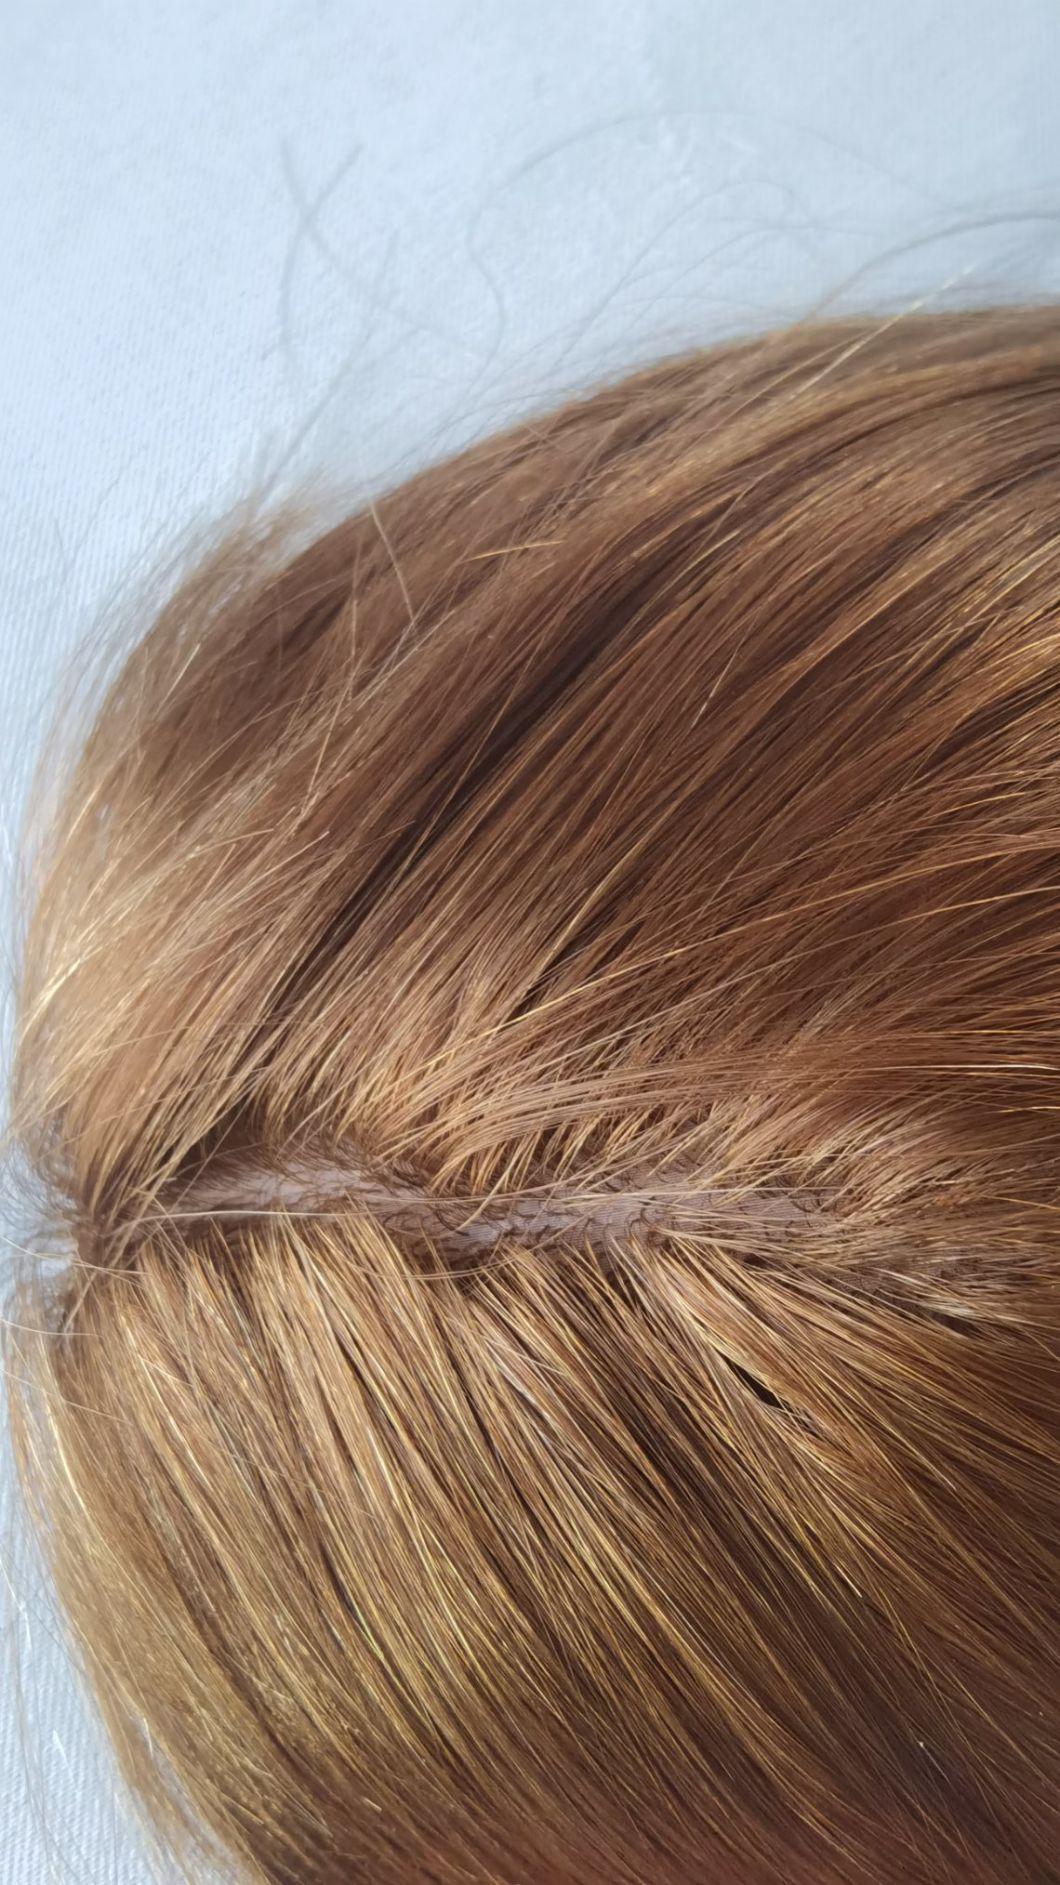 2022 Most Natural Silk Top Injected Lace Human Hair Made of Remy Human Hair